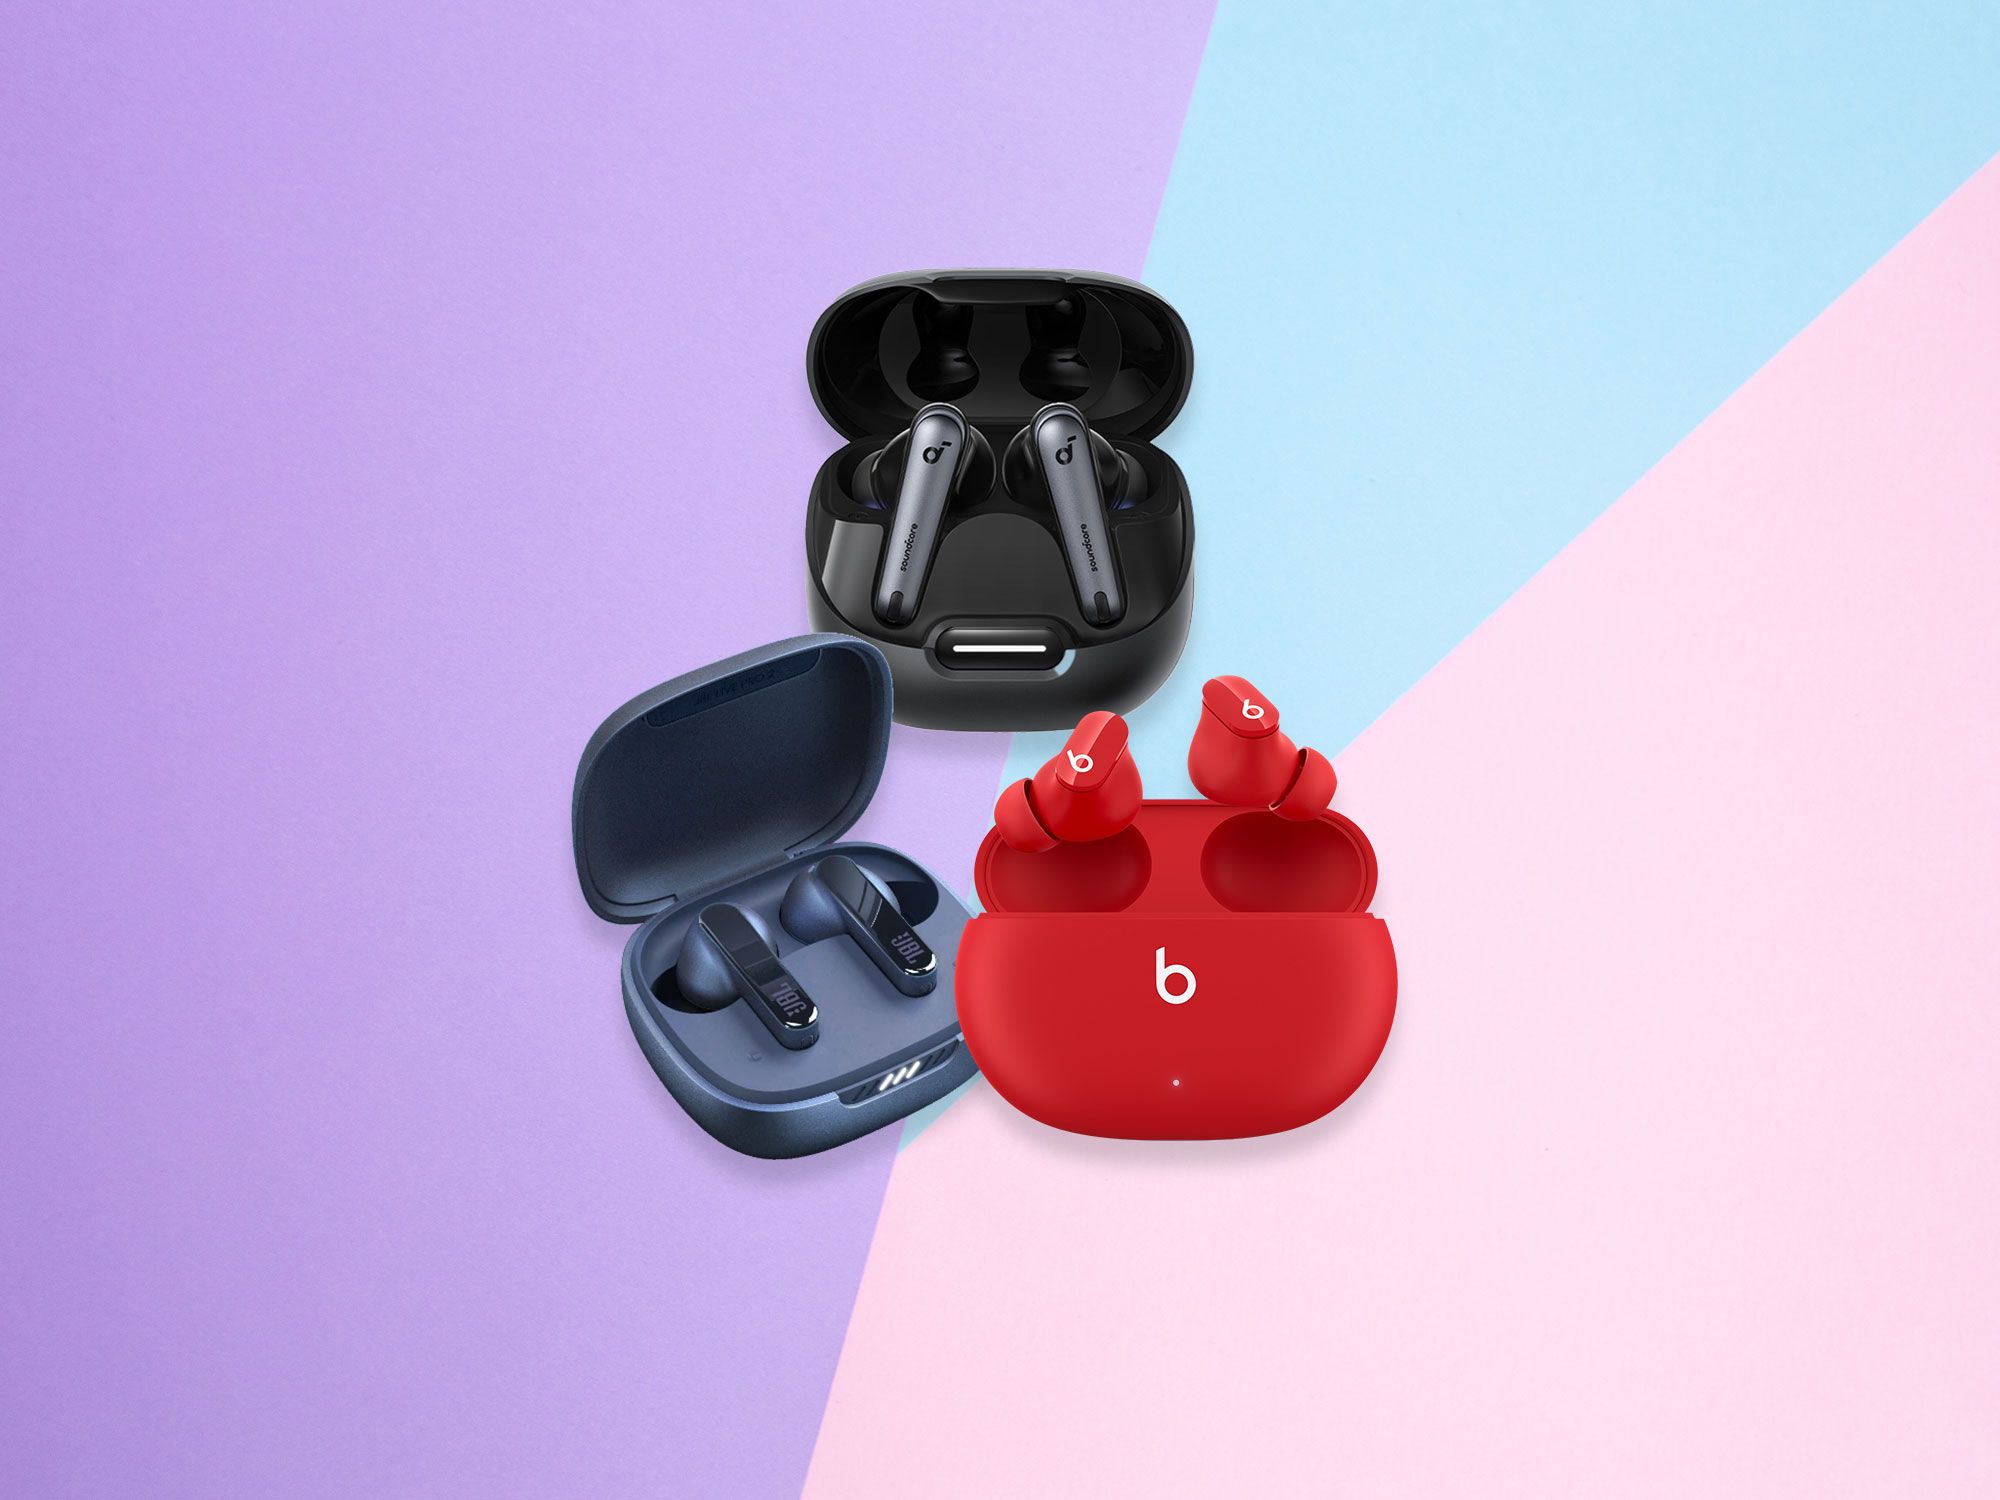 This Black Friday deal makes the Nothing Ear (2) wireless earbuds a steal